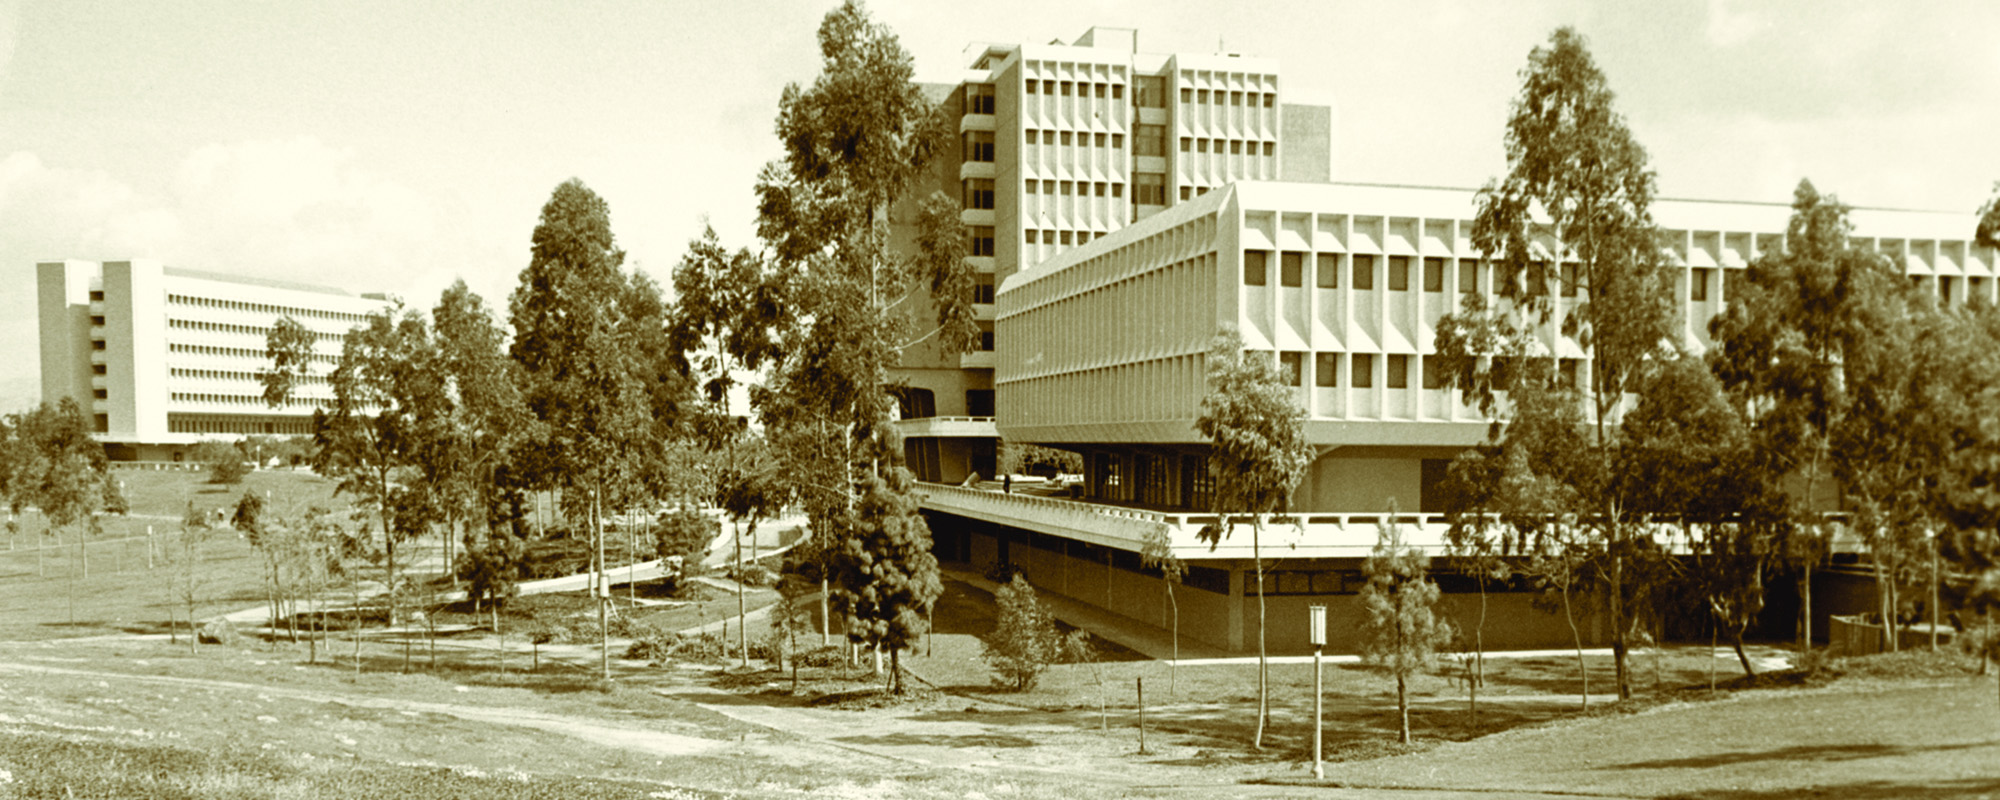 UCI in 1970s